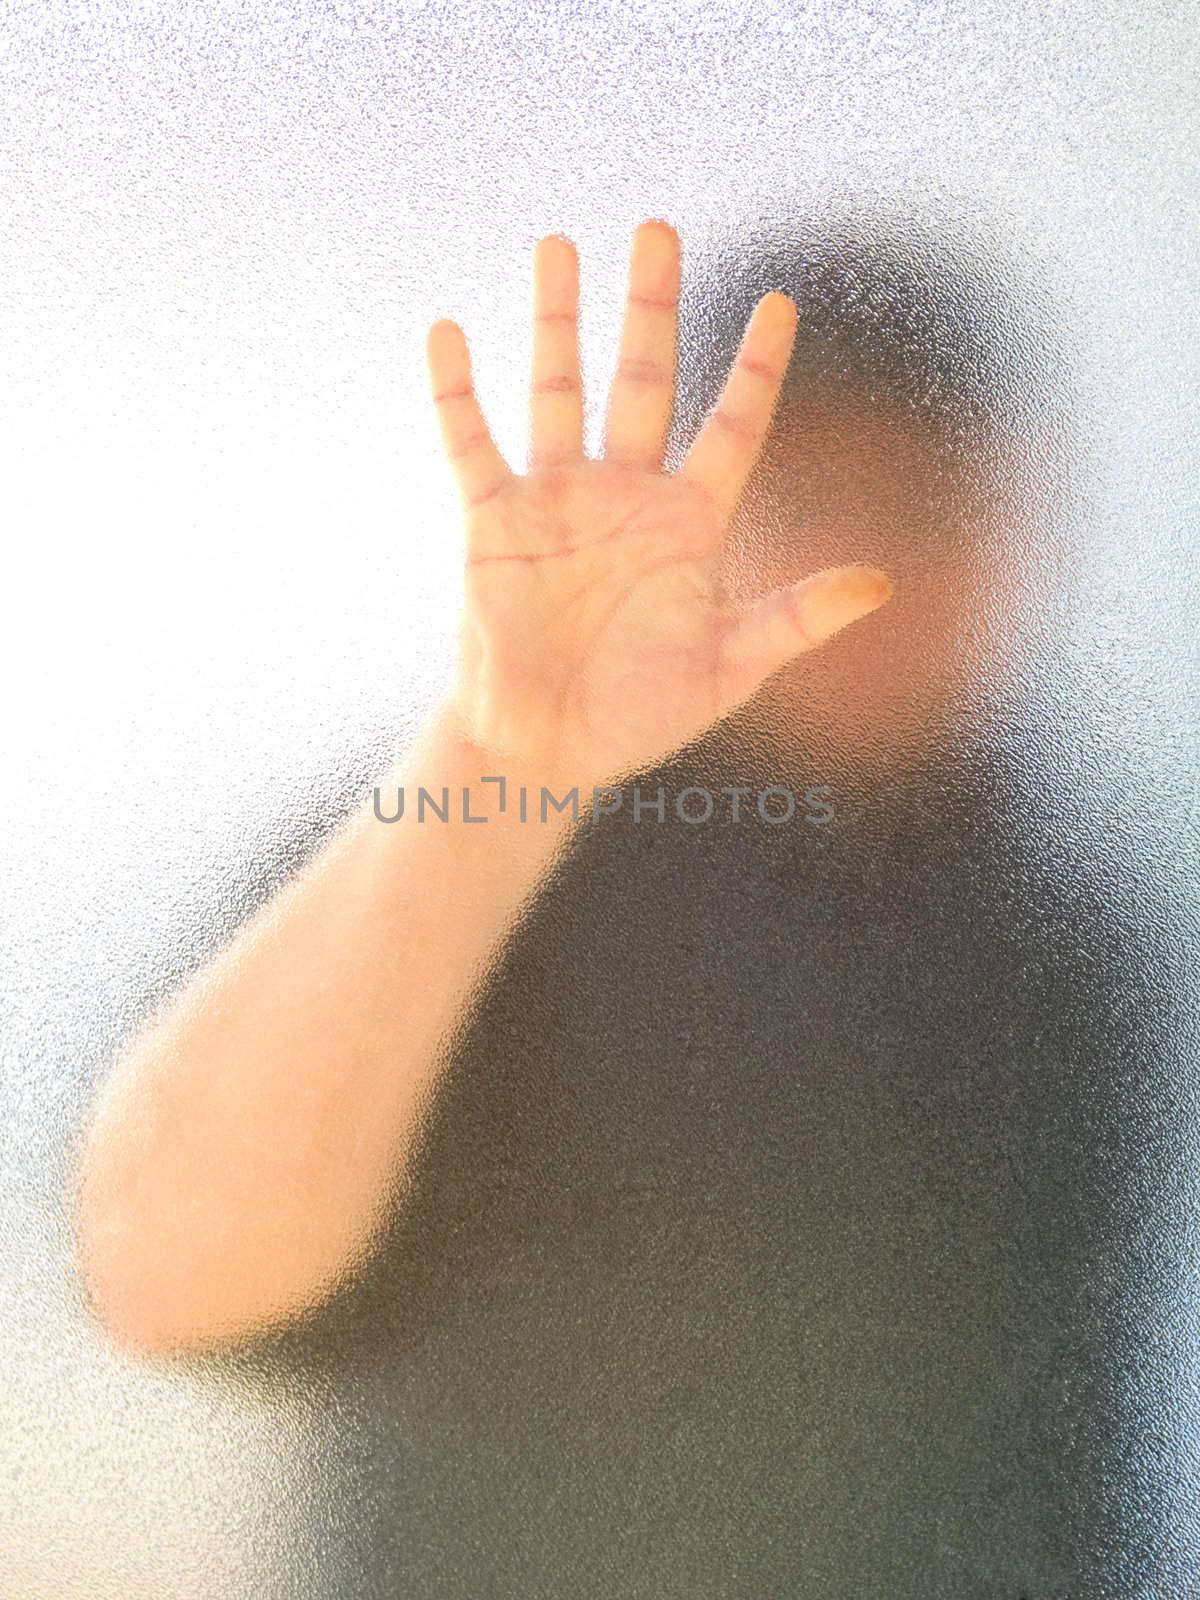 Silhouette of a man's body through frosted glass 